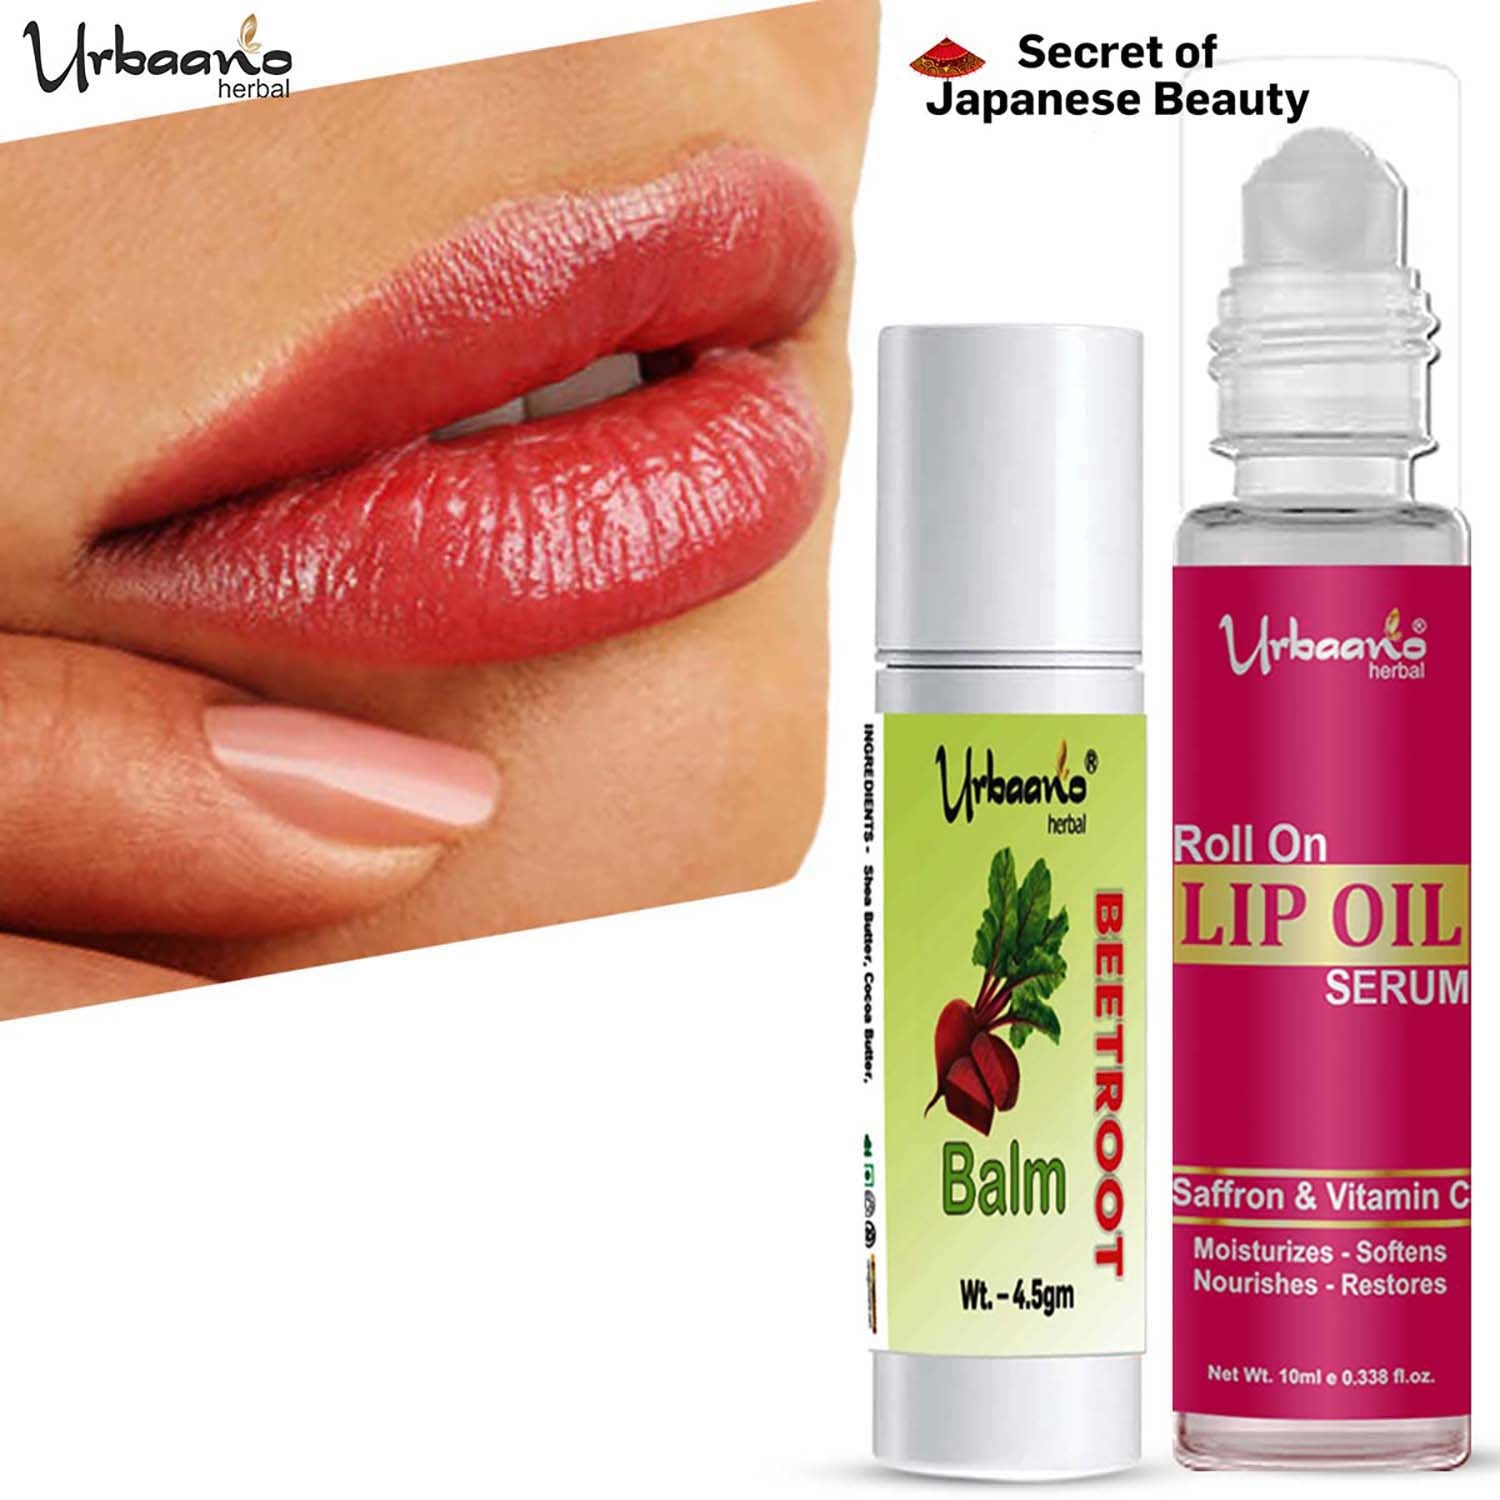 urbaano herbal tint lip and cheek balm and oil, serum japanese squalne olive oil  for nourishment, moiaturisation of lips